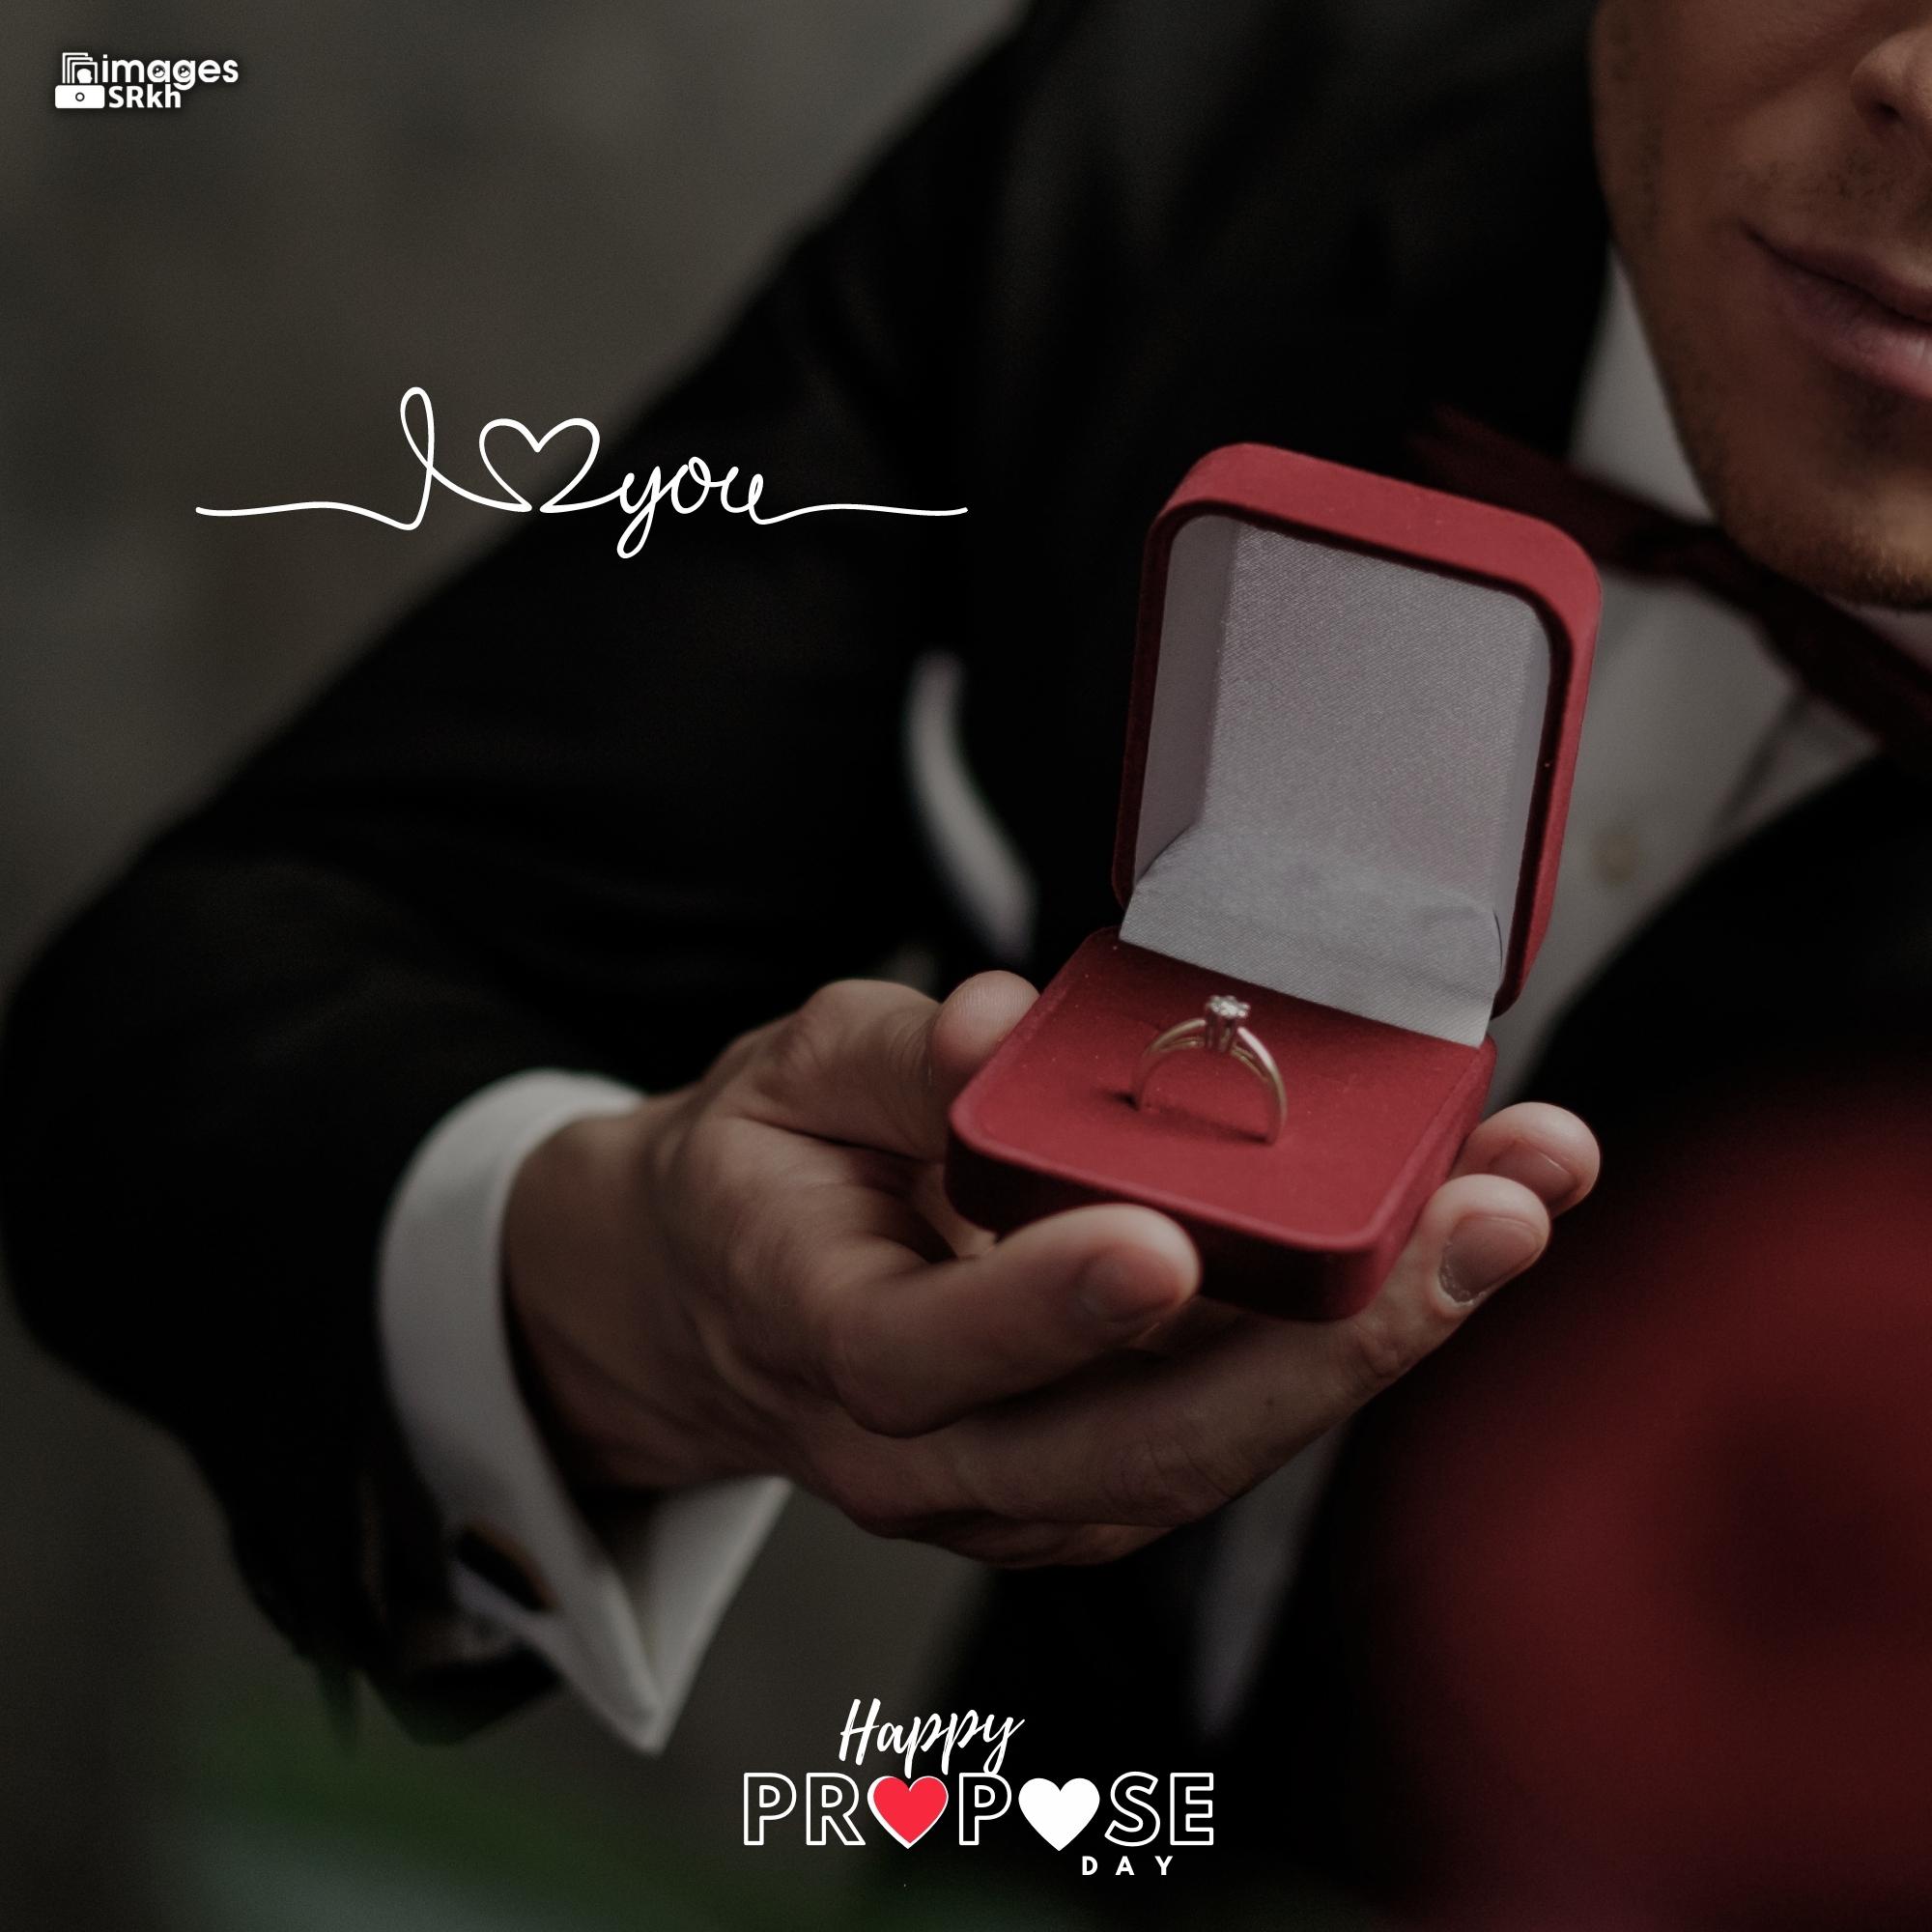 Happy Propose Day Images | 308 | I LOVE YOU